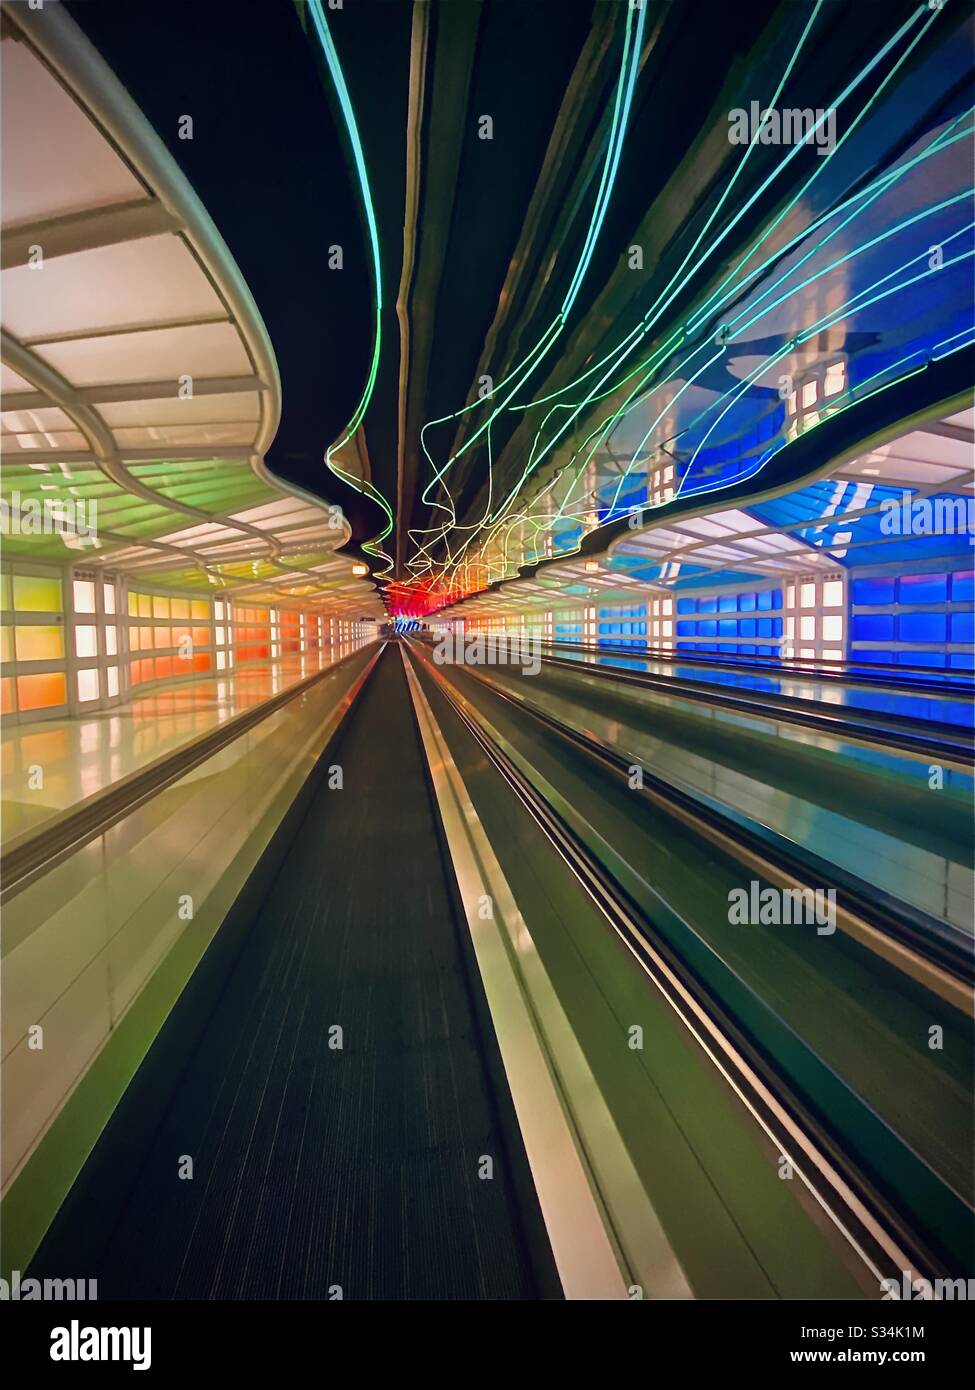 O’Hare International Airport in Chicago, Illinois. Tunnel between Concourses B and C of United Terminal with moving colorful neon lights and moving walkway. Stock Photo